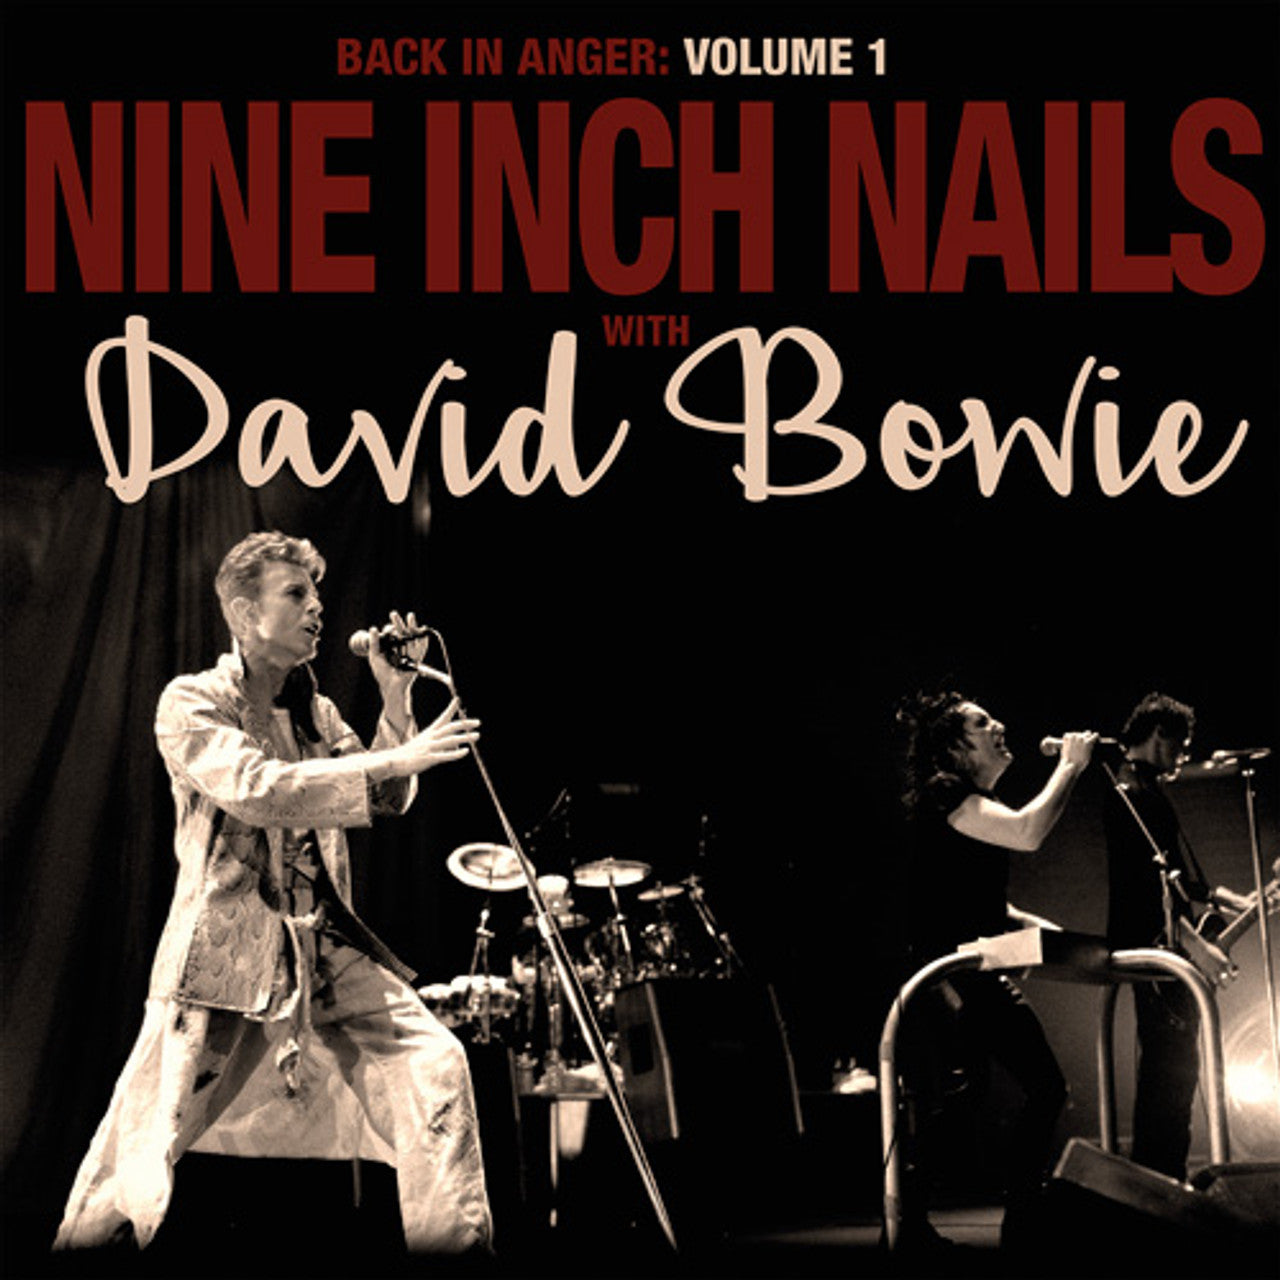 NINE INCH NAILS WITH DAVID BOWIE - BACK IN ANGER: VOLUME 1